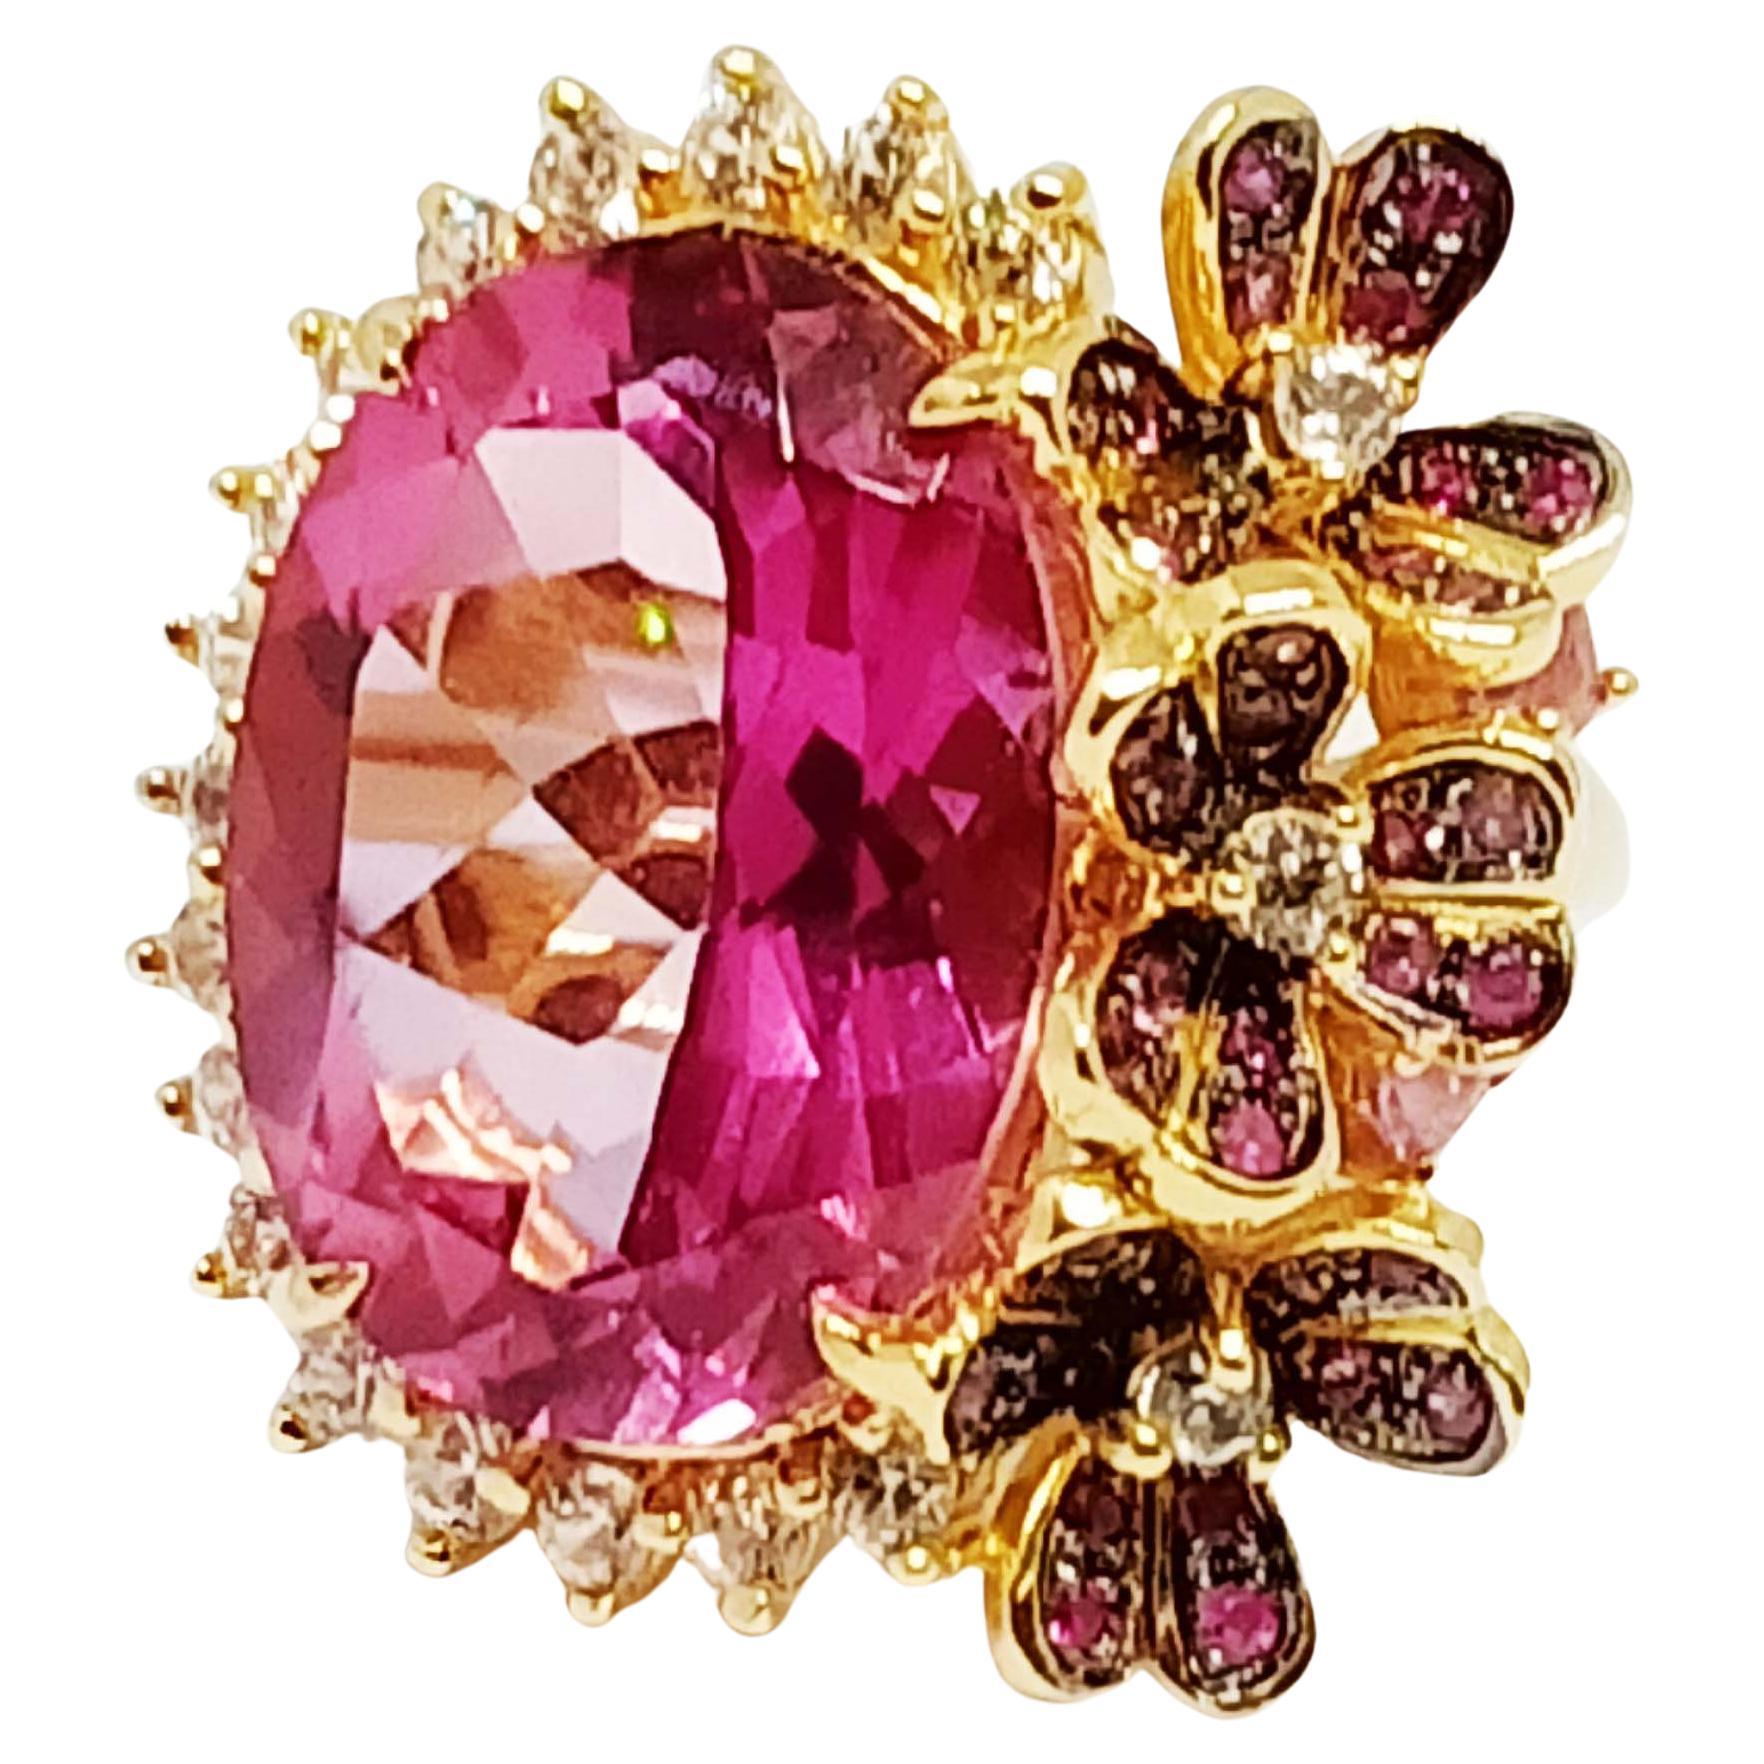 (Big Ring)
Pink topaz Oval 18x13 mm (14.92cts) 
Pink sappire pave setting size1.3 mm. 36 pcs. and Black rhodium
White zircon size 2 mm. 20 pcs.
18K gold plated on Sterling Silver

Search sellers storesfront ( ornamento jewellery )
